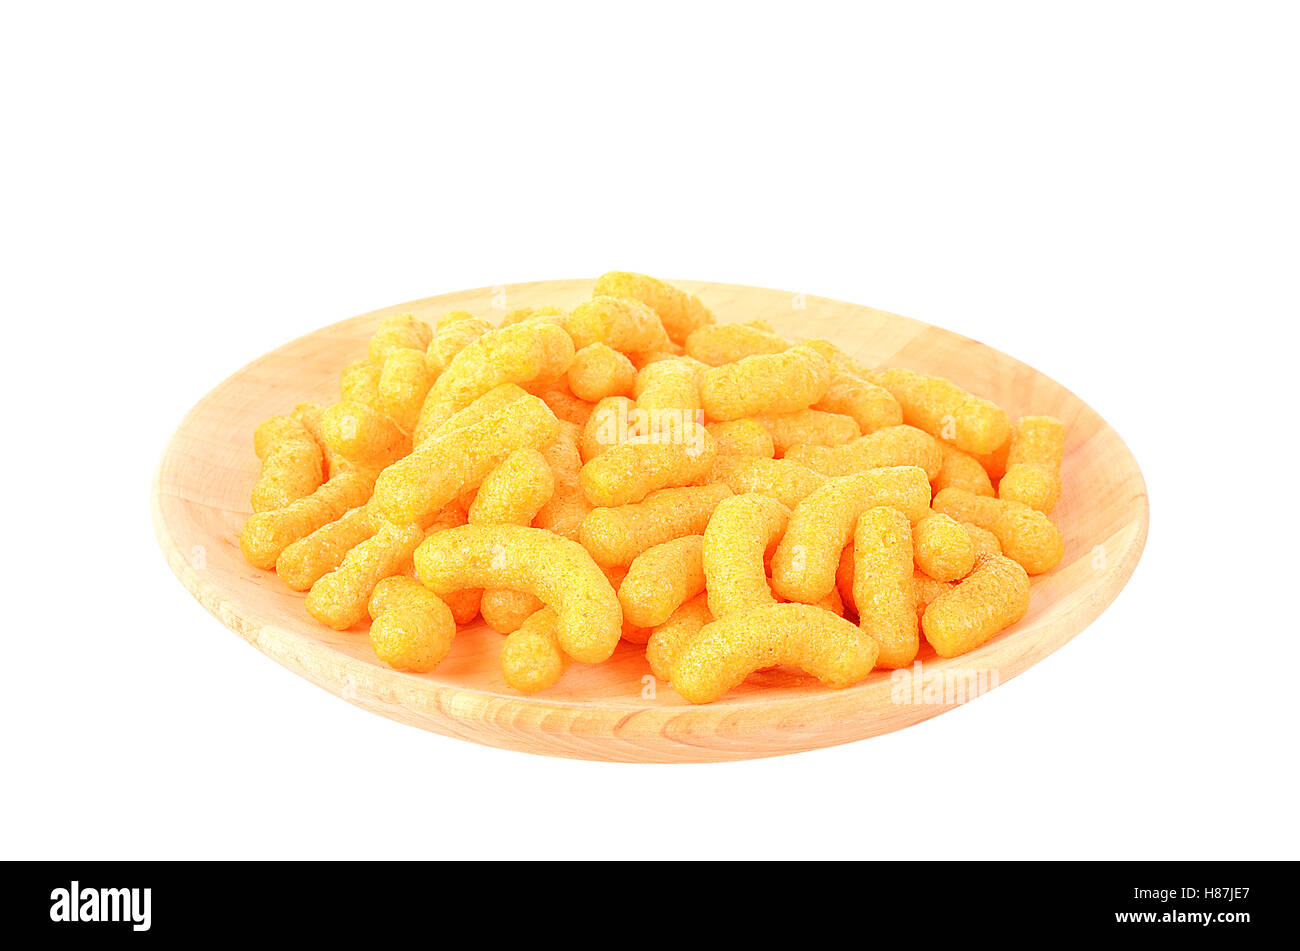 Dry breakfast isolated on a white background Stock Photo